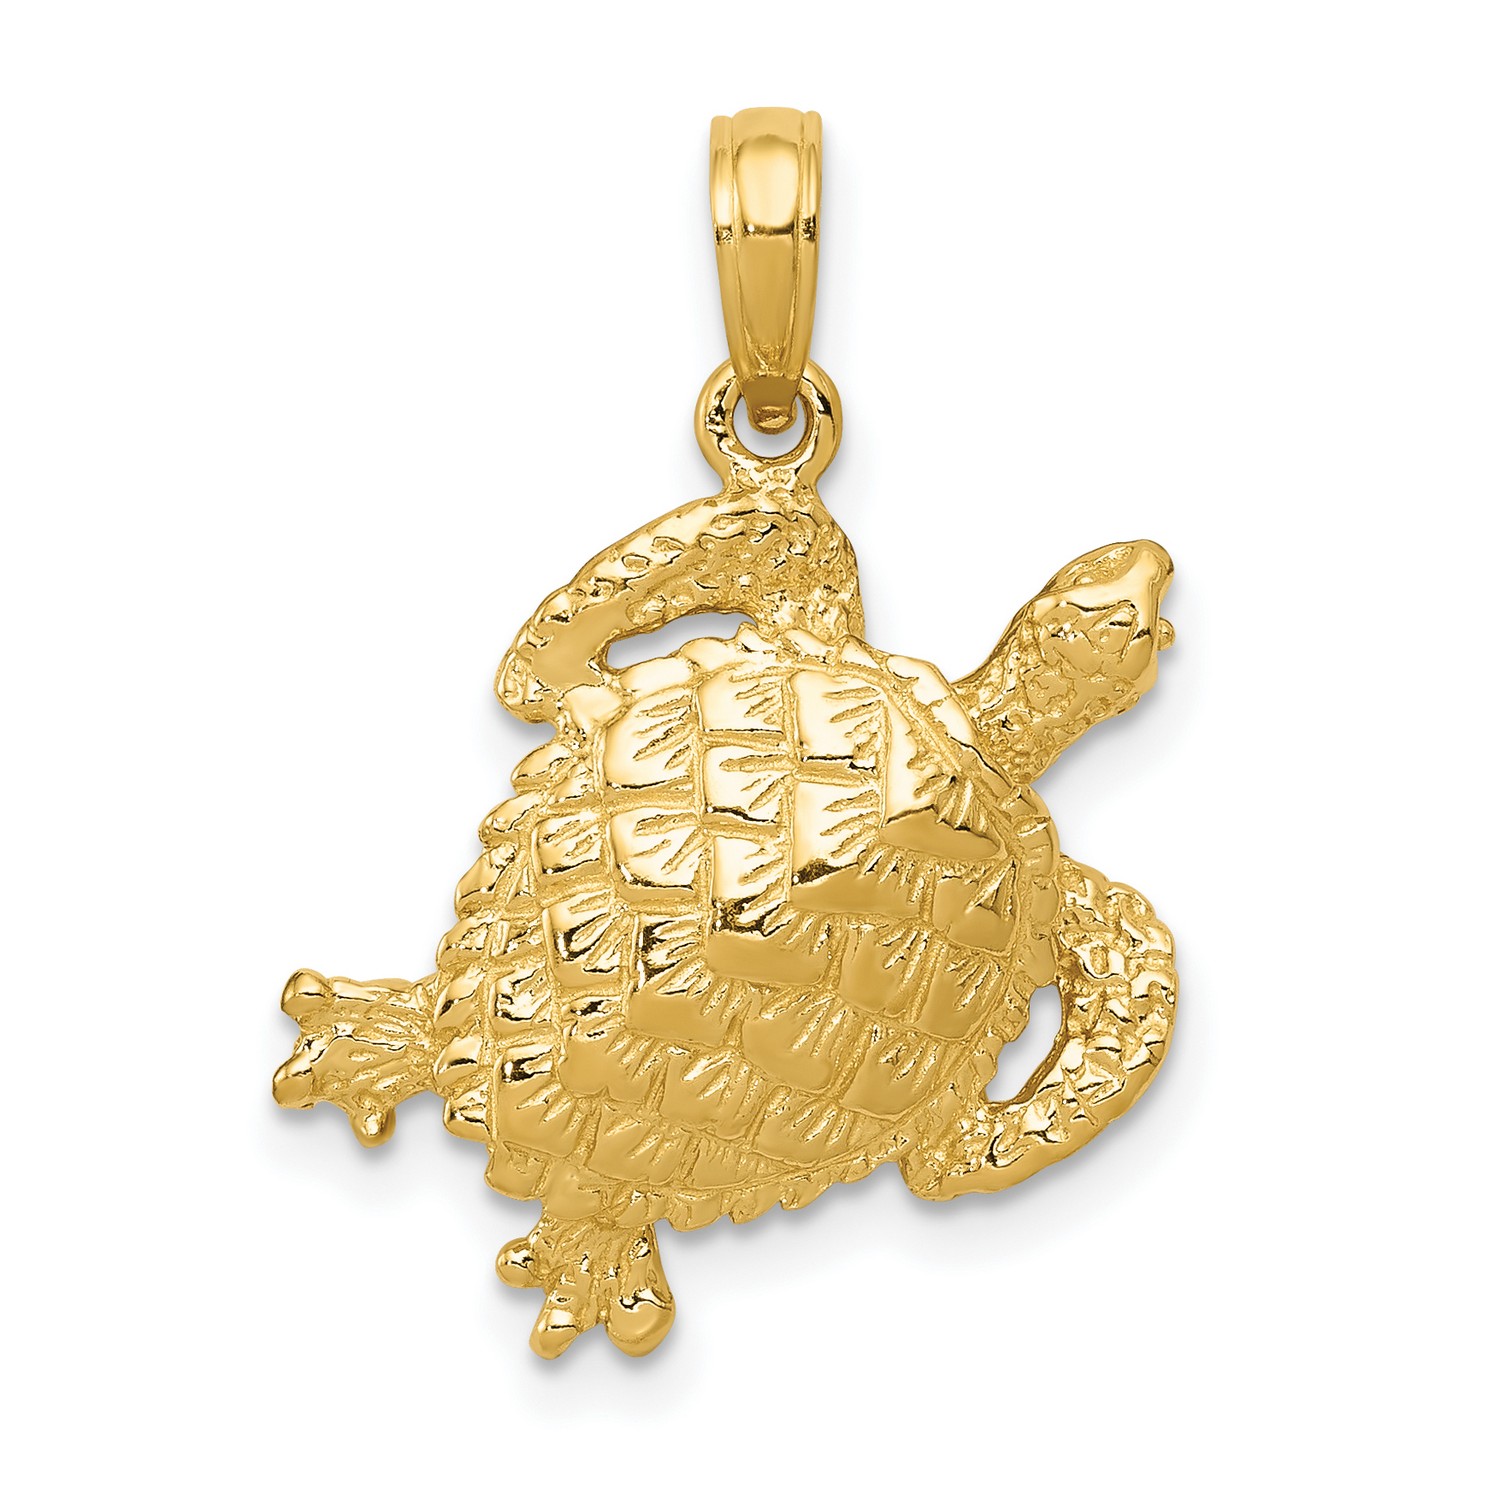 Pre-owned Jewelry Stores Network 14k Yellow Gold Polished Turtle Charm Pendant